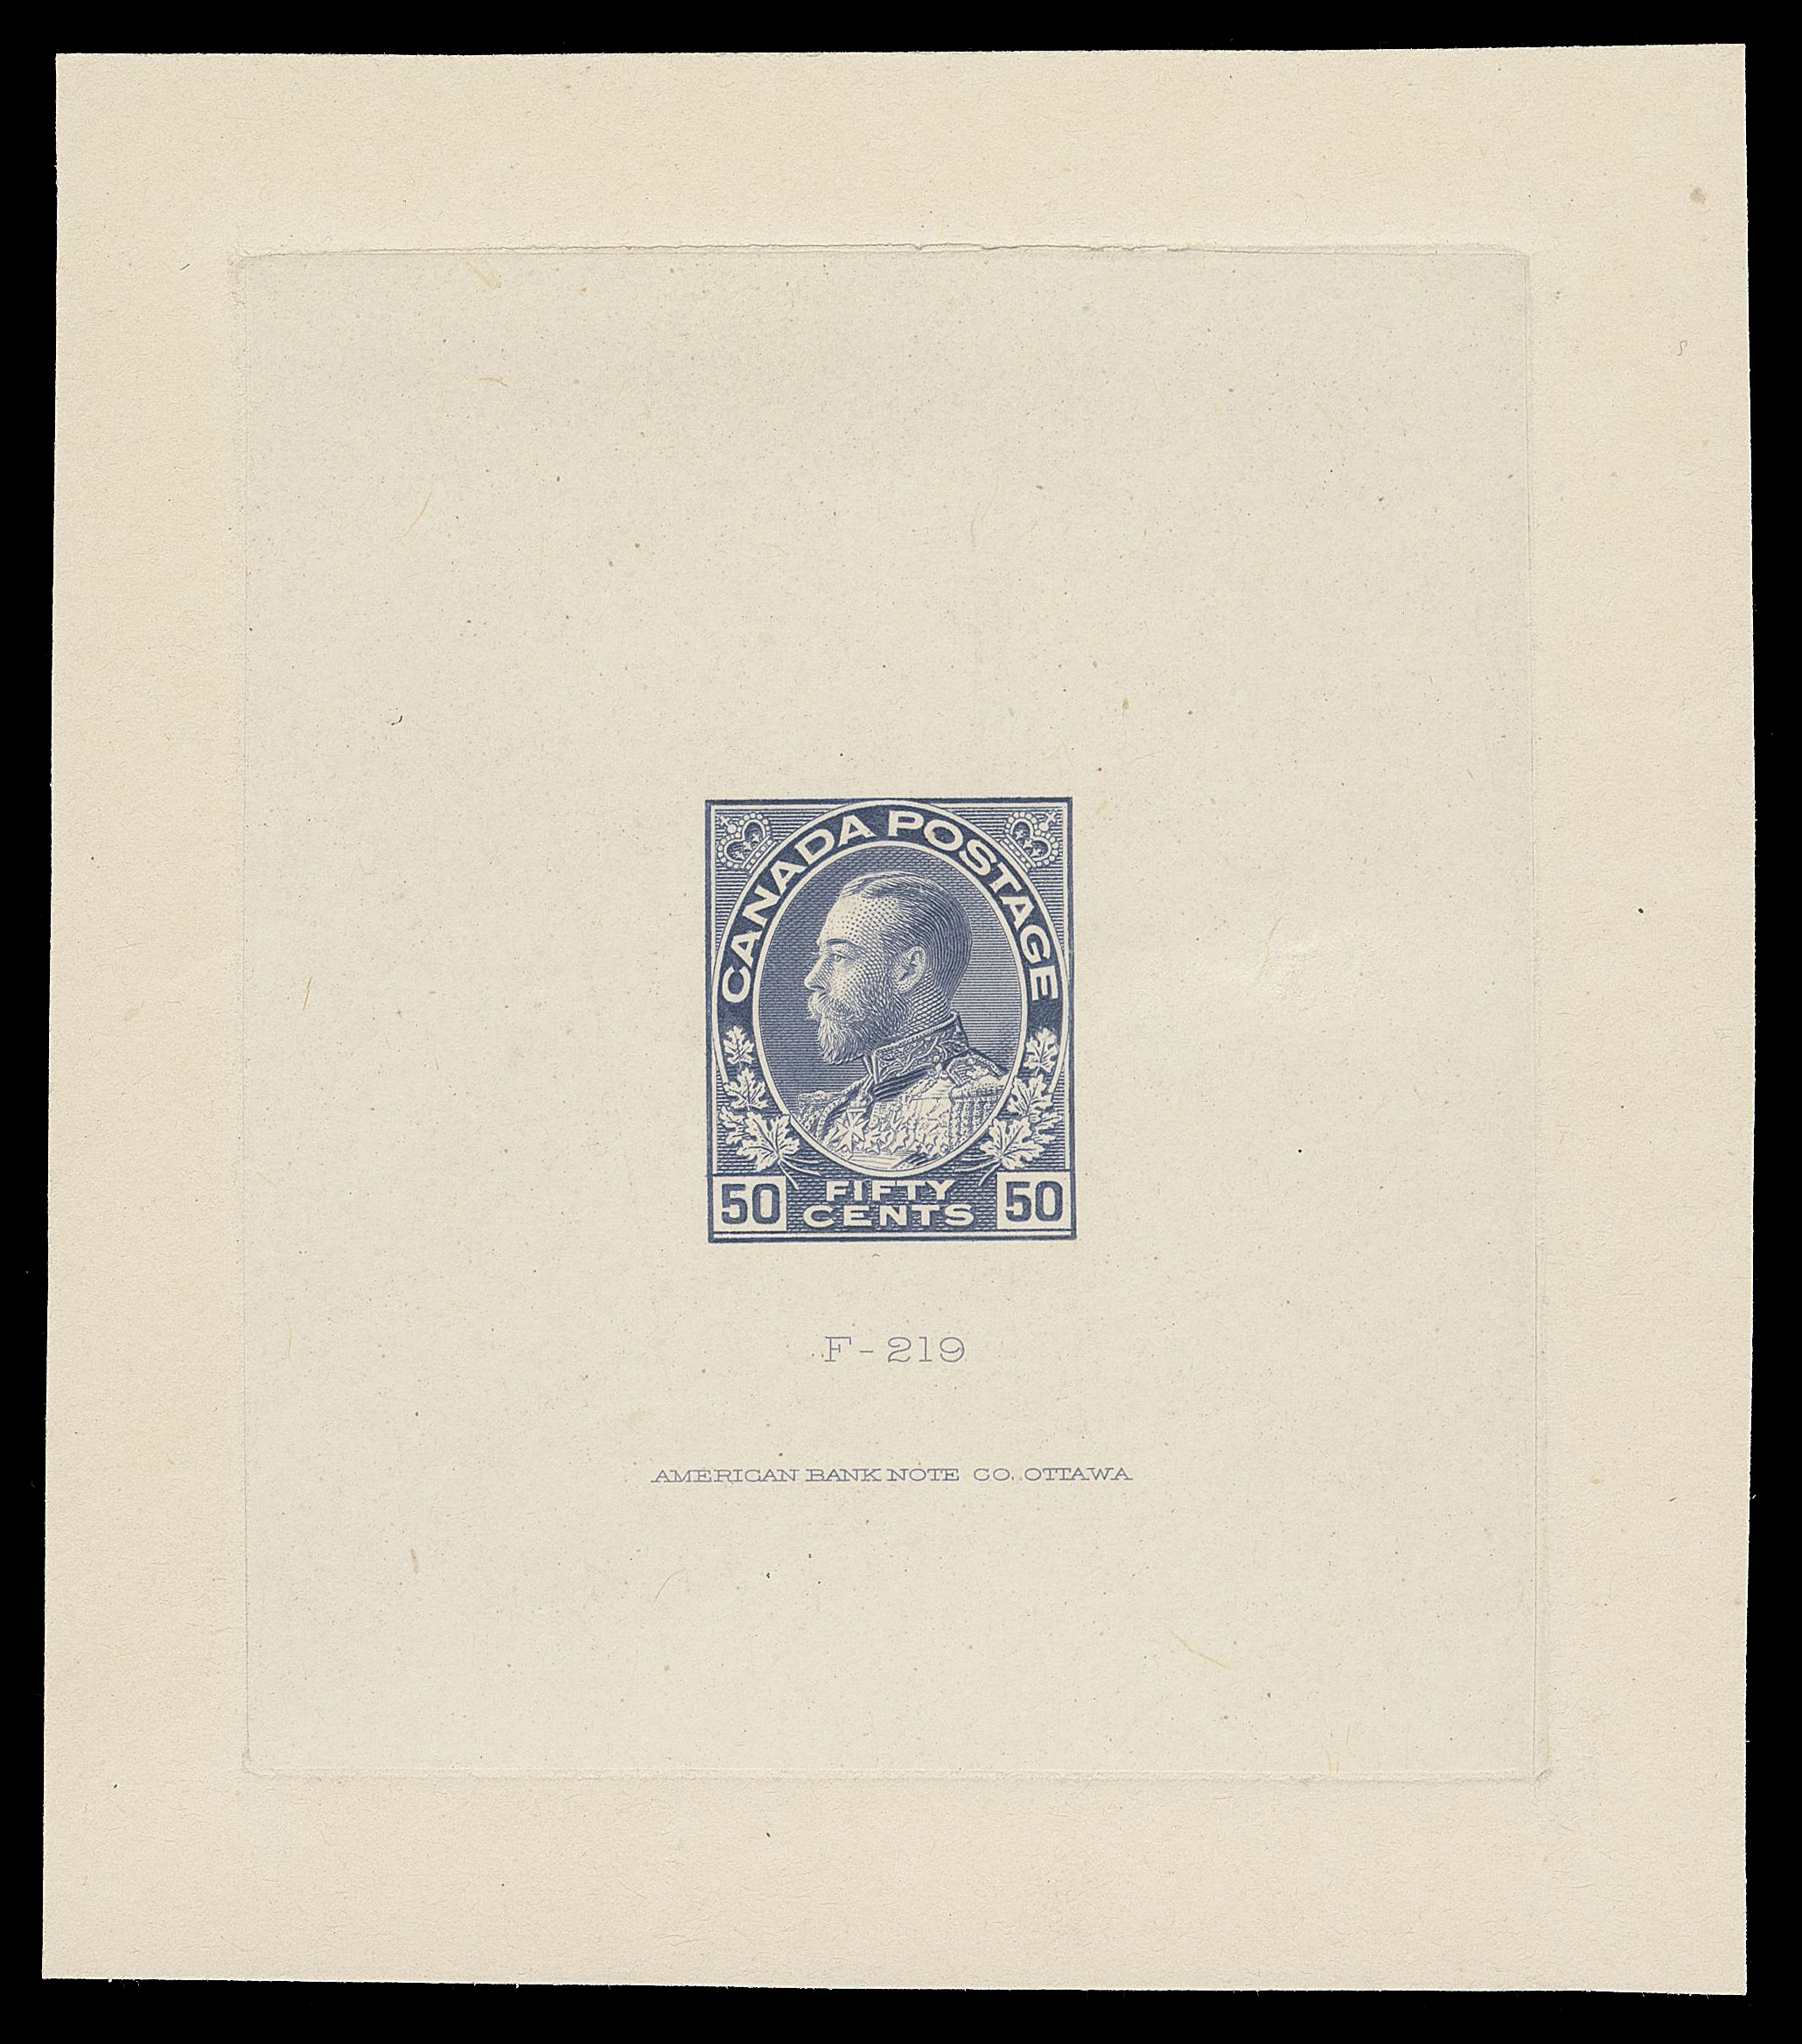 ADMIRAL PROOFS  120,A remarkable Trial Colour Die Proof, printed in an unissued greyish blue shade on india paper 63 x 75mm, die sunk on larger card 83 x 94mm, slight abrasion in no way detracting from its beautiful appearance. The hardened die with die number "F-219" and ABNC imprint (23.5mm wide). A visually striking coloured proof believed to be one of only four known to exist (all from the 1990 ABNC sale), VF (Minuse & Pratt 120 A TC1 unlisted in this colour)